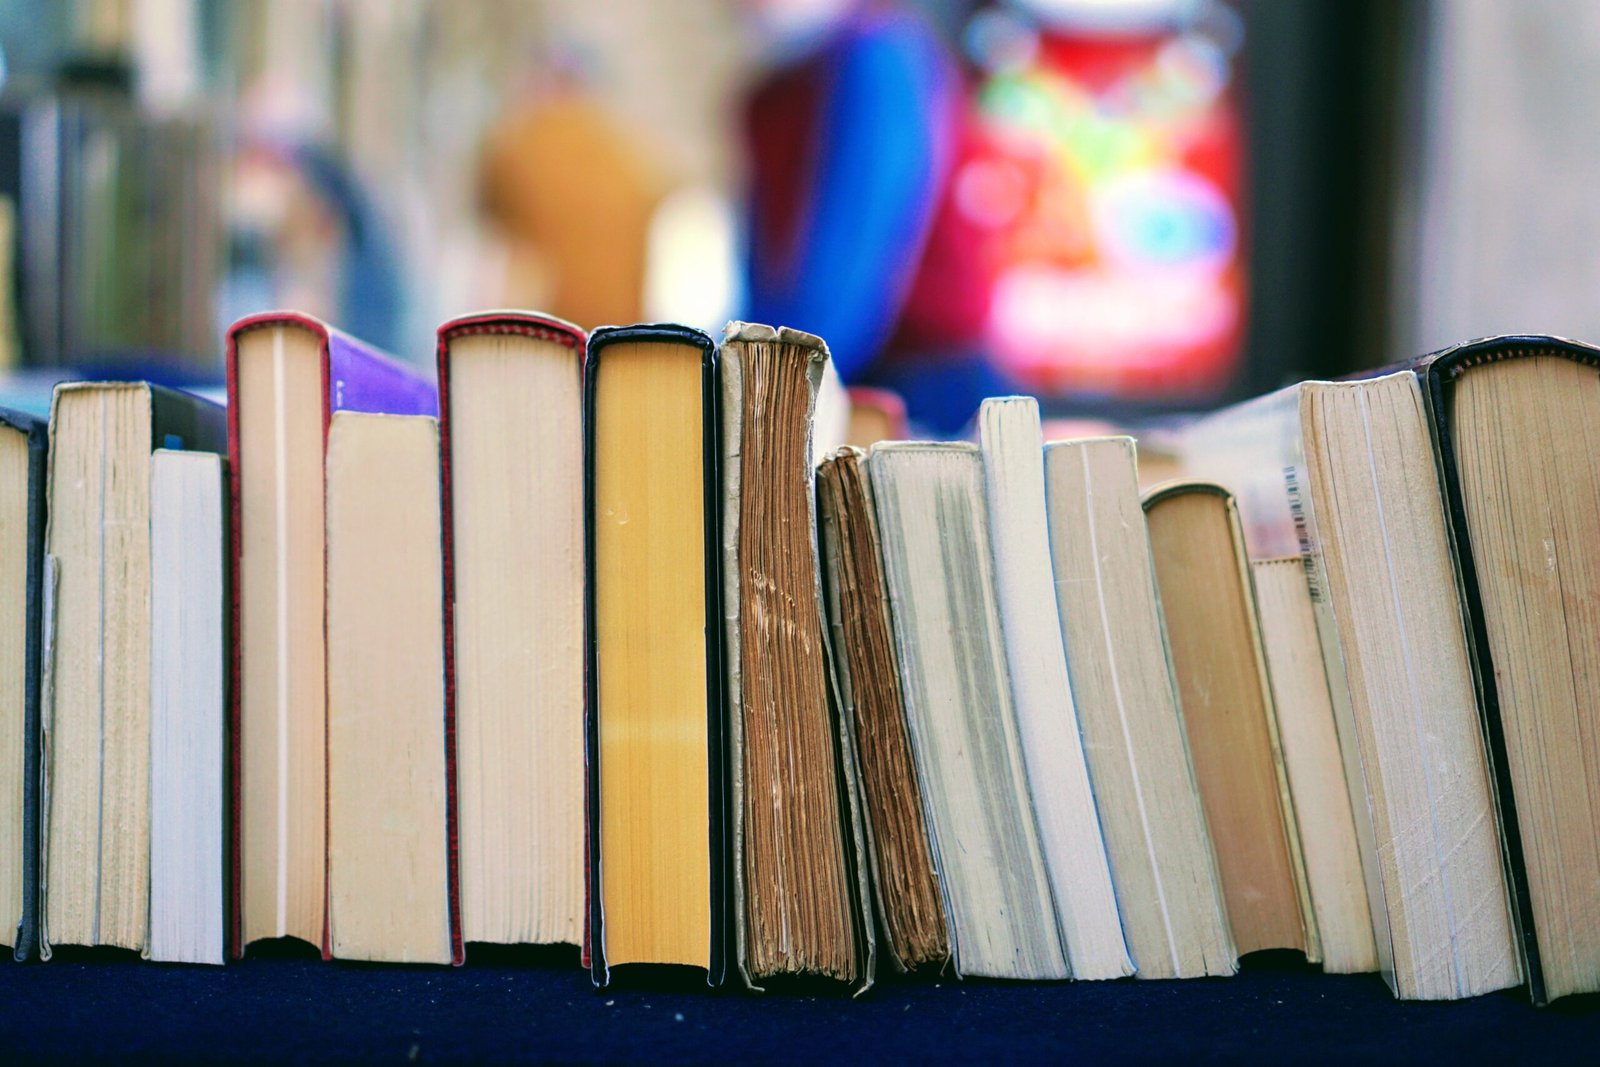 5 Ways Books Impact Our Mental Health